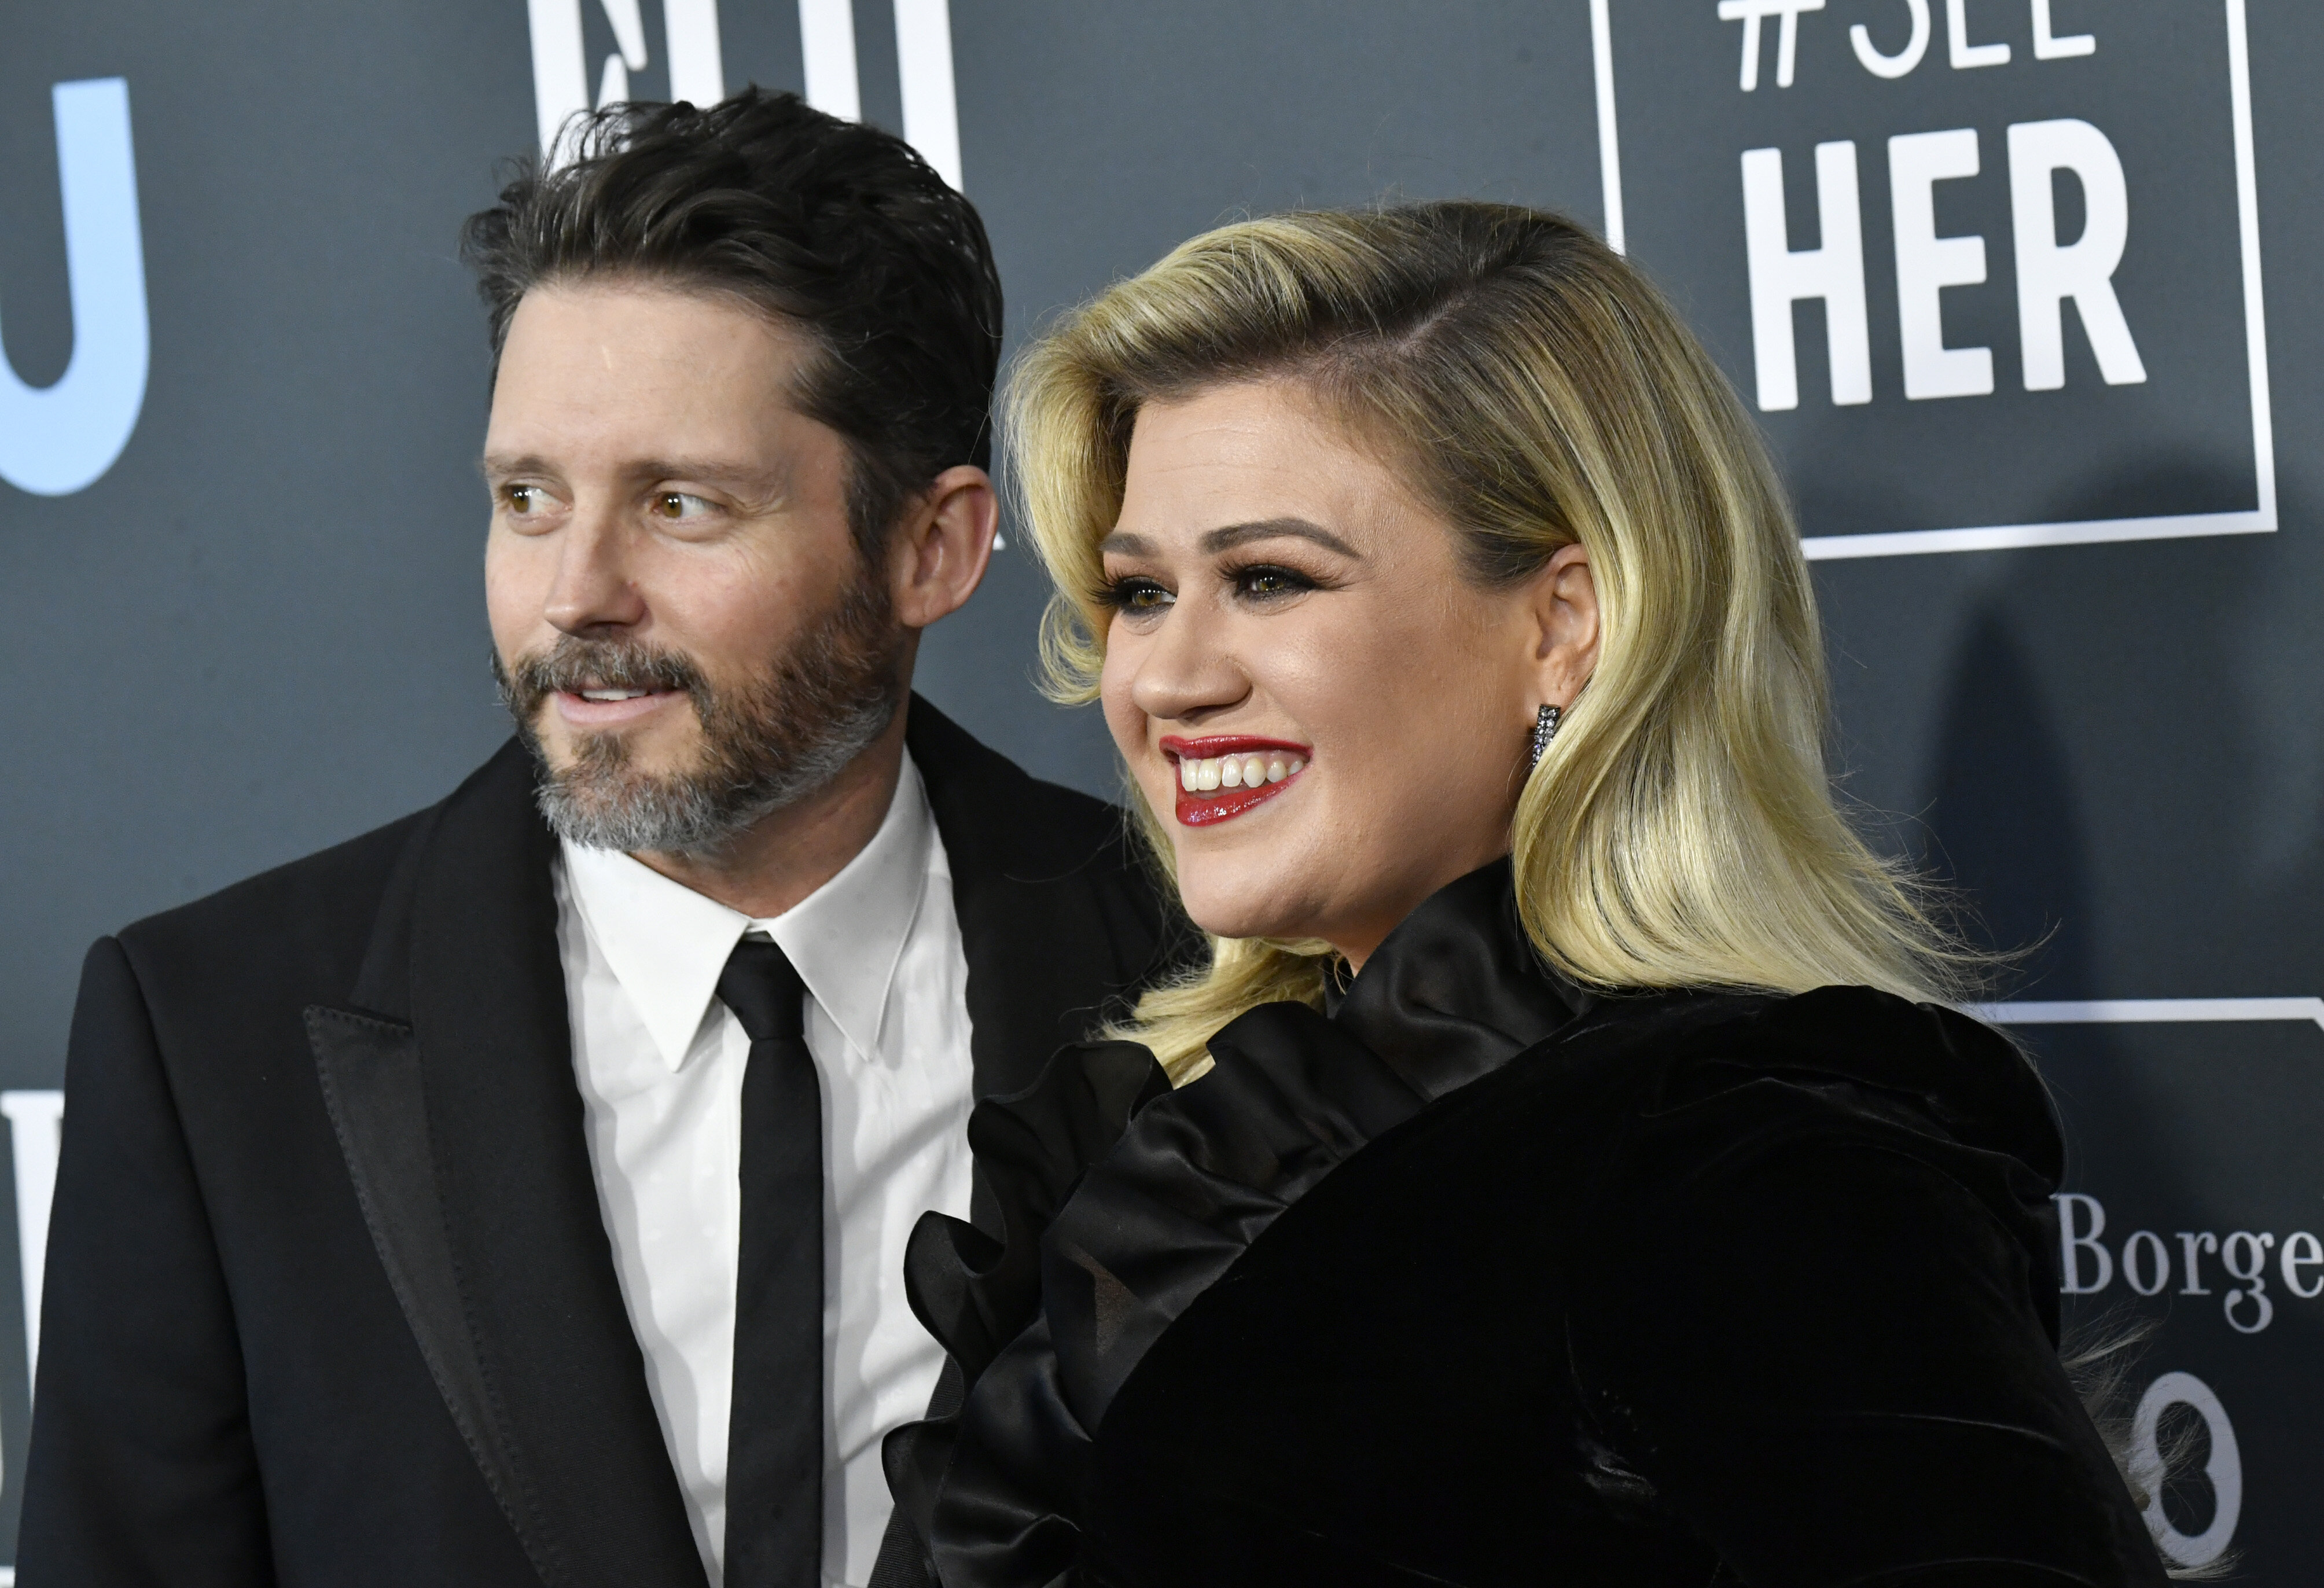 Kelly Clarkson Must Pay Ex-Husband Nearly $200,000 A Month Amid Divorce HuffPost Entertainment picture